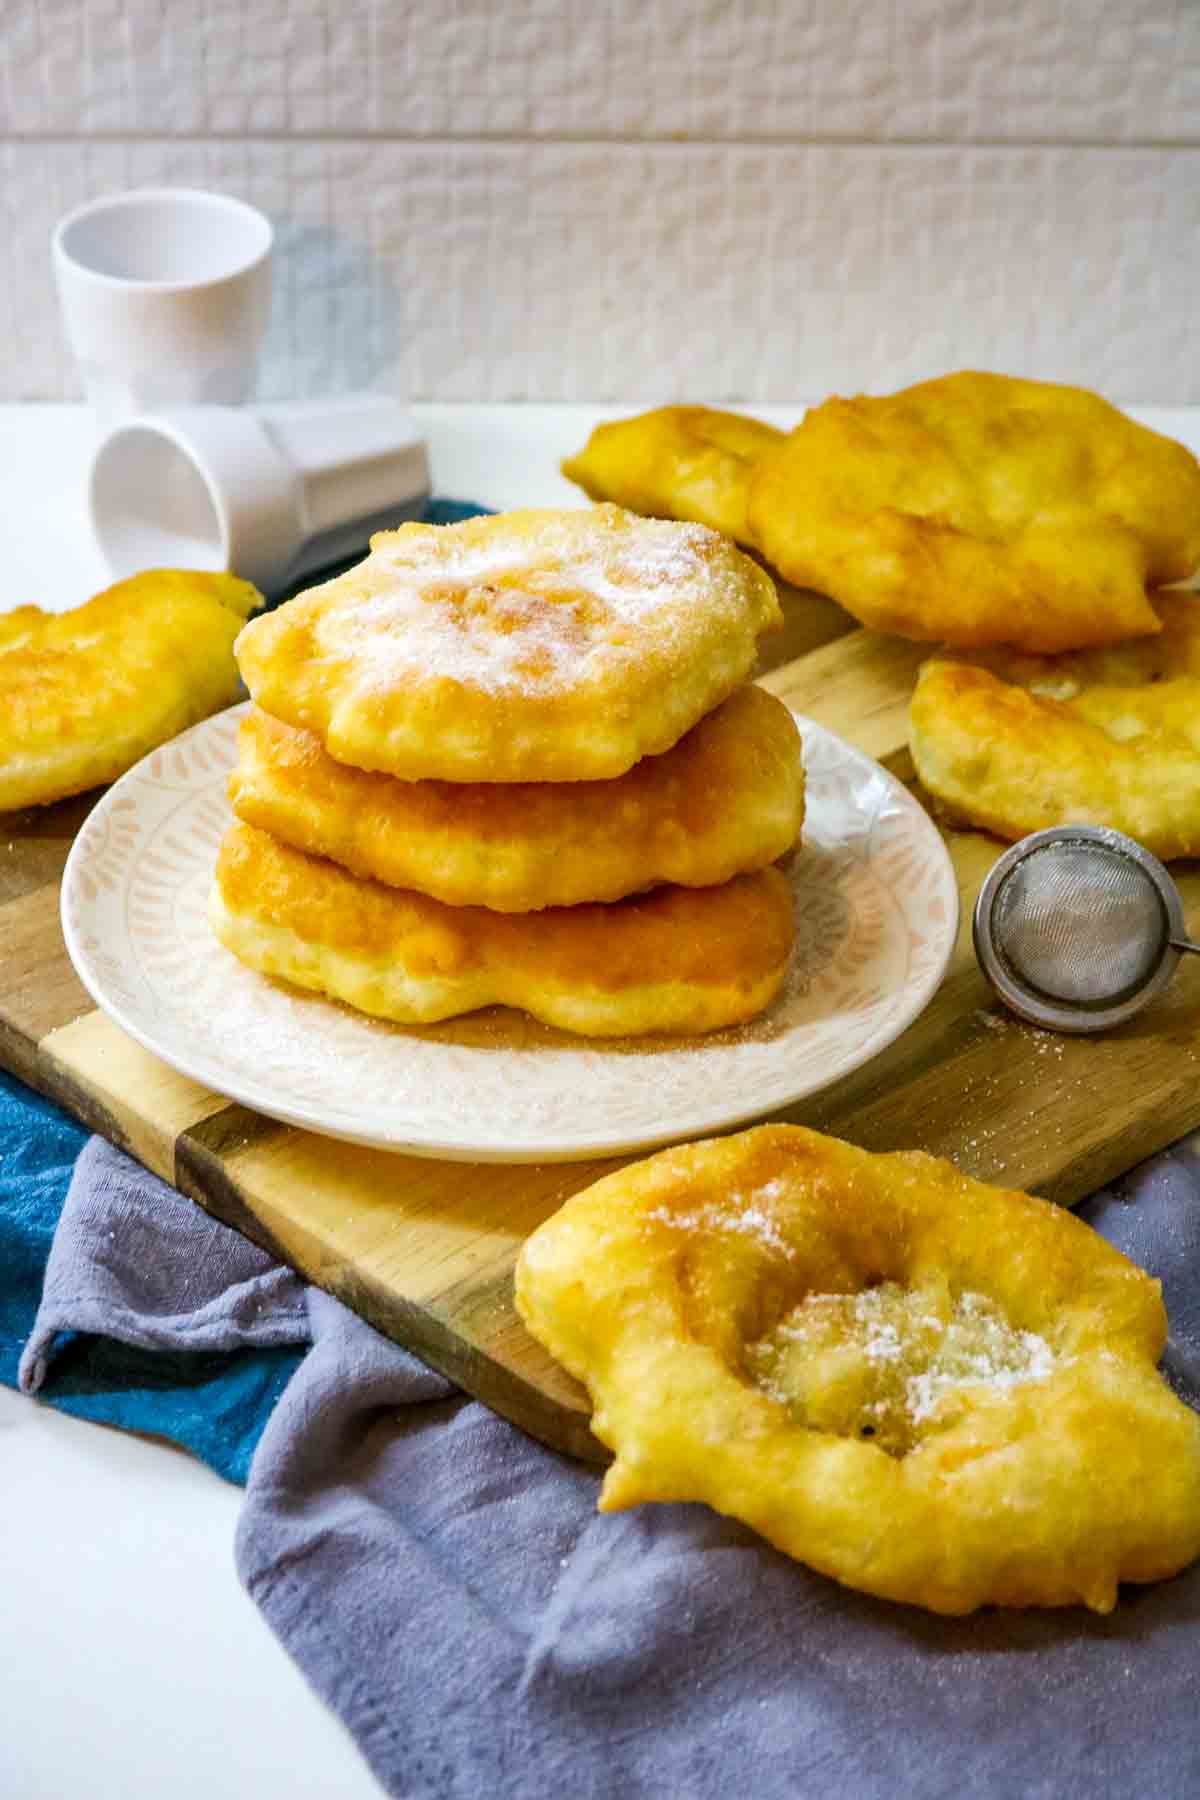 Mekitsi on a white plate surrounded by other pieces of sugared fried dough.